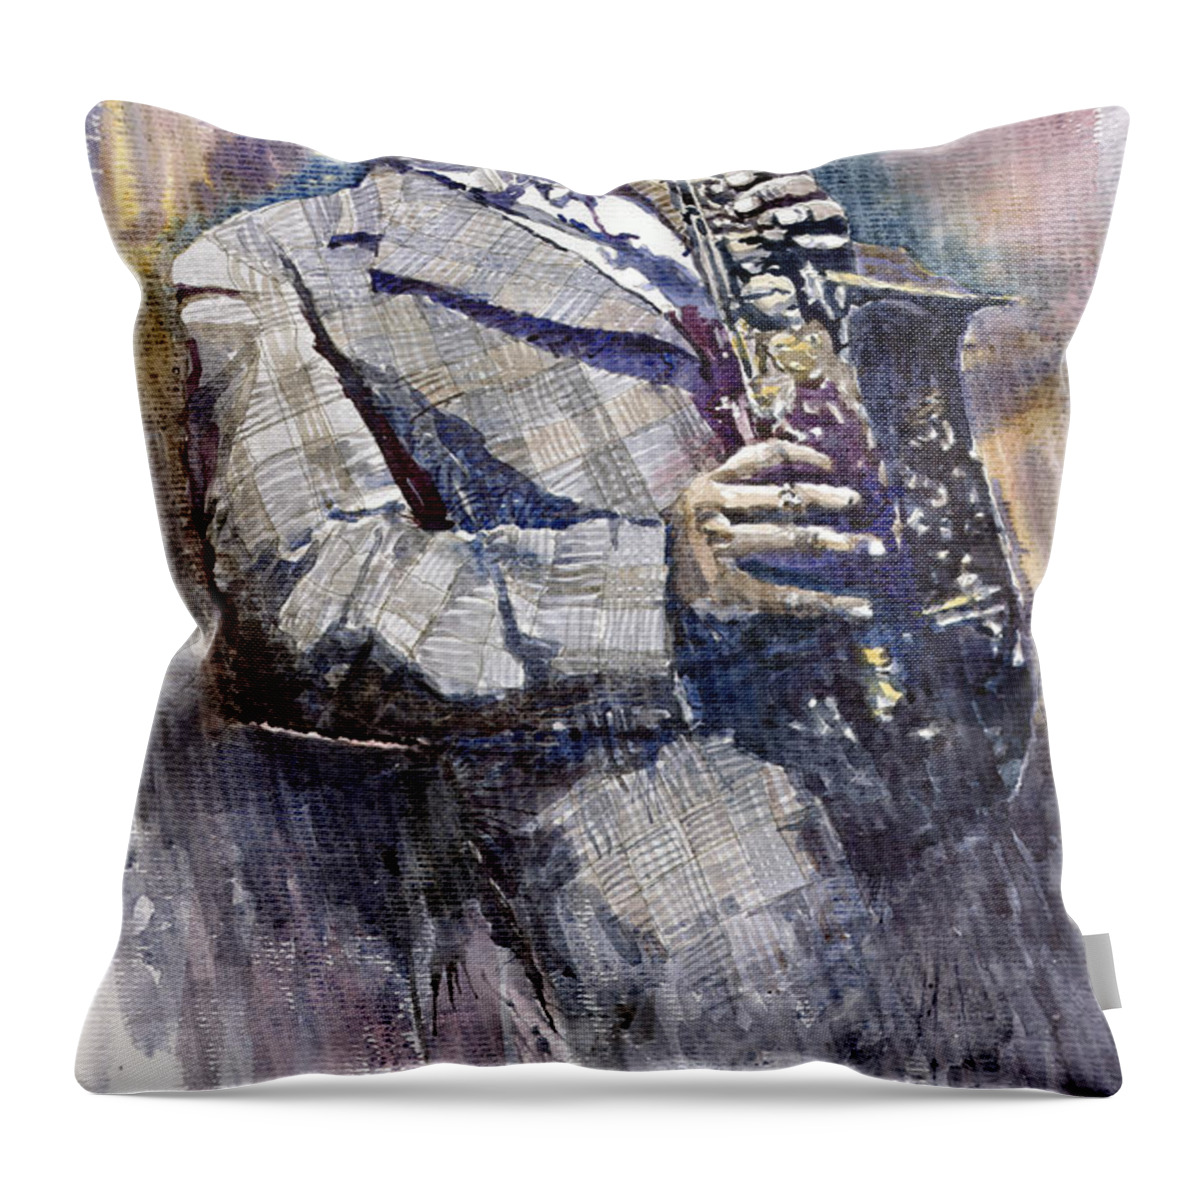 Watercolor Throw Pillow featuring the painting Jazz Saxophonist Charlie Parker by Yuriy Shevchuk